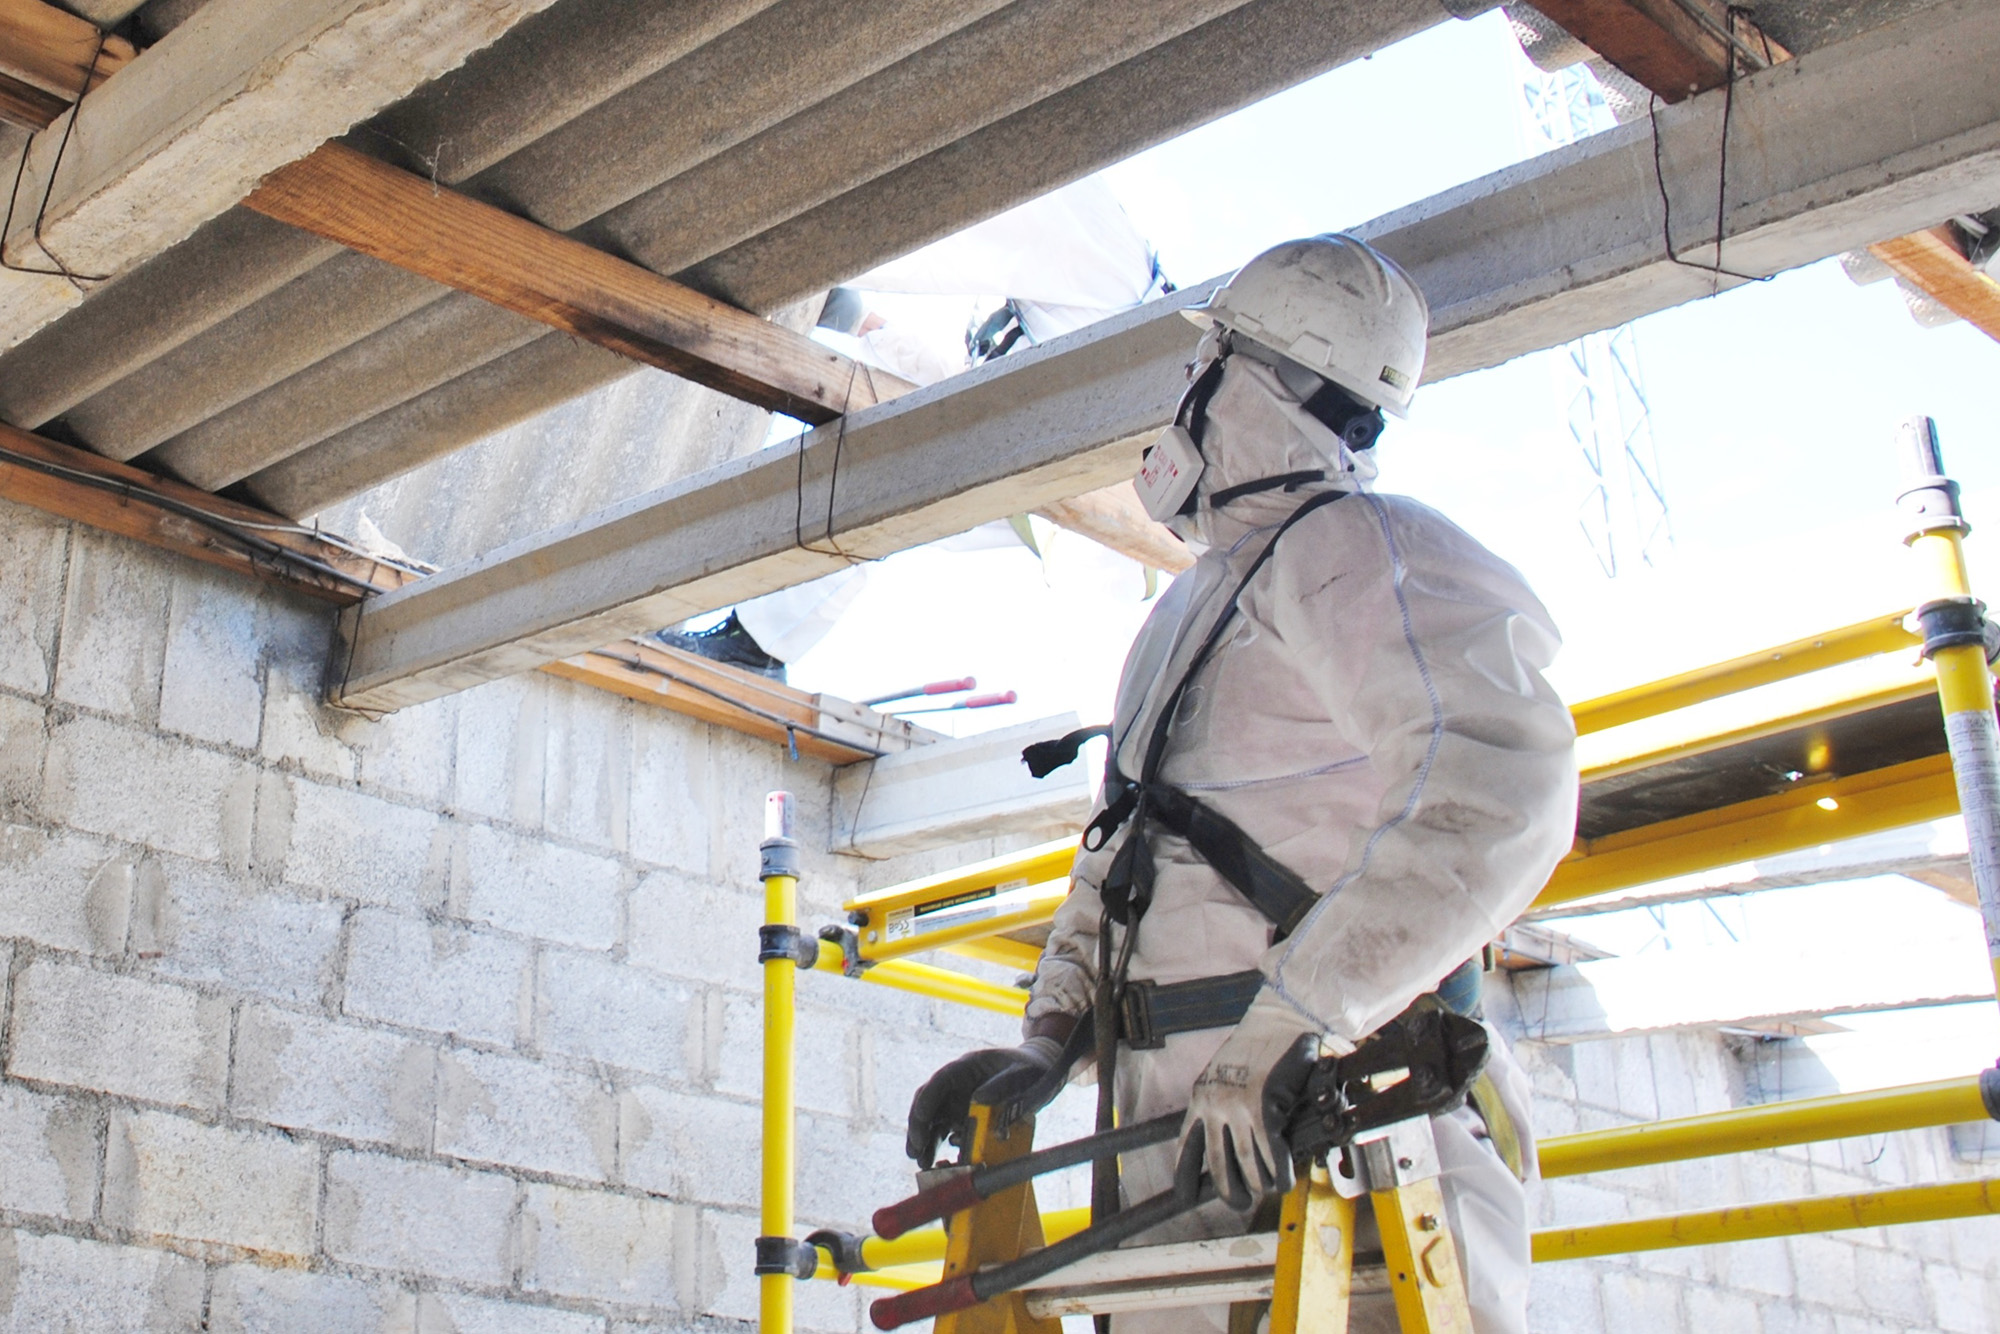 Safety Matters: Asbestos Awareness: A construction worker in a hazmat suit disposing of asbestos in an old warehouse.